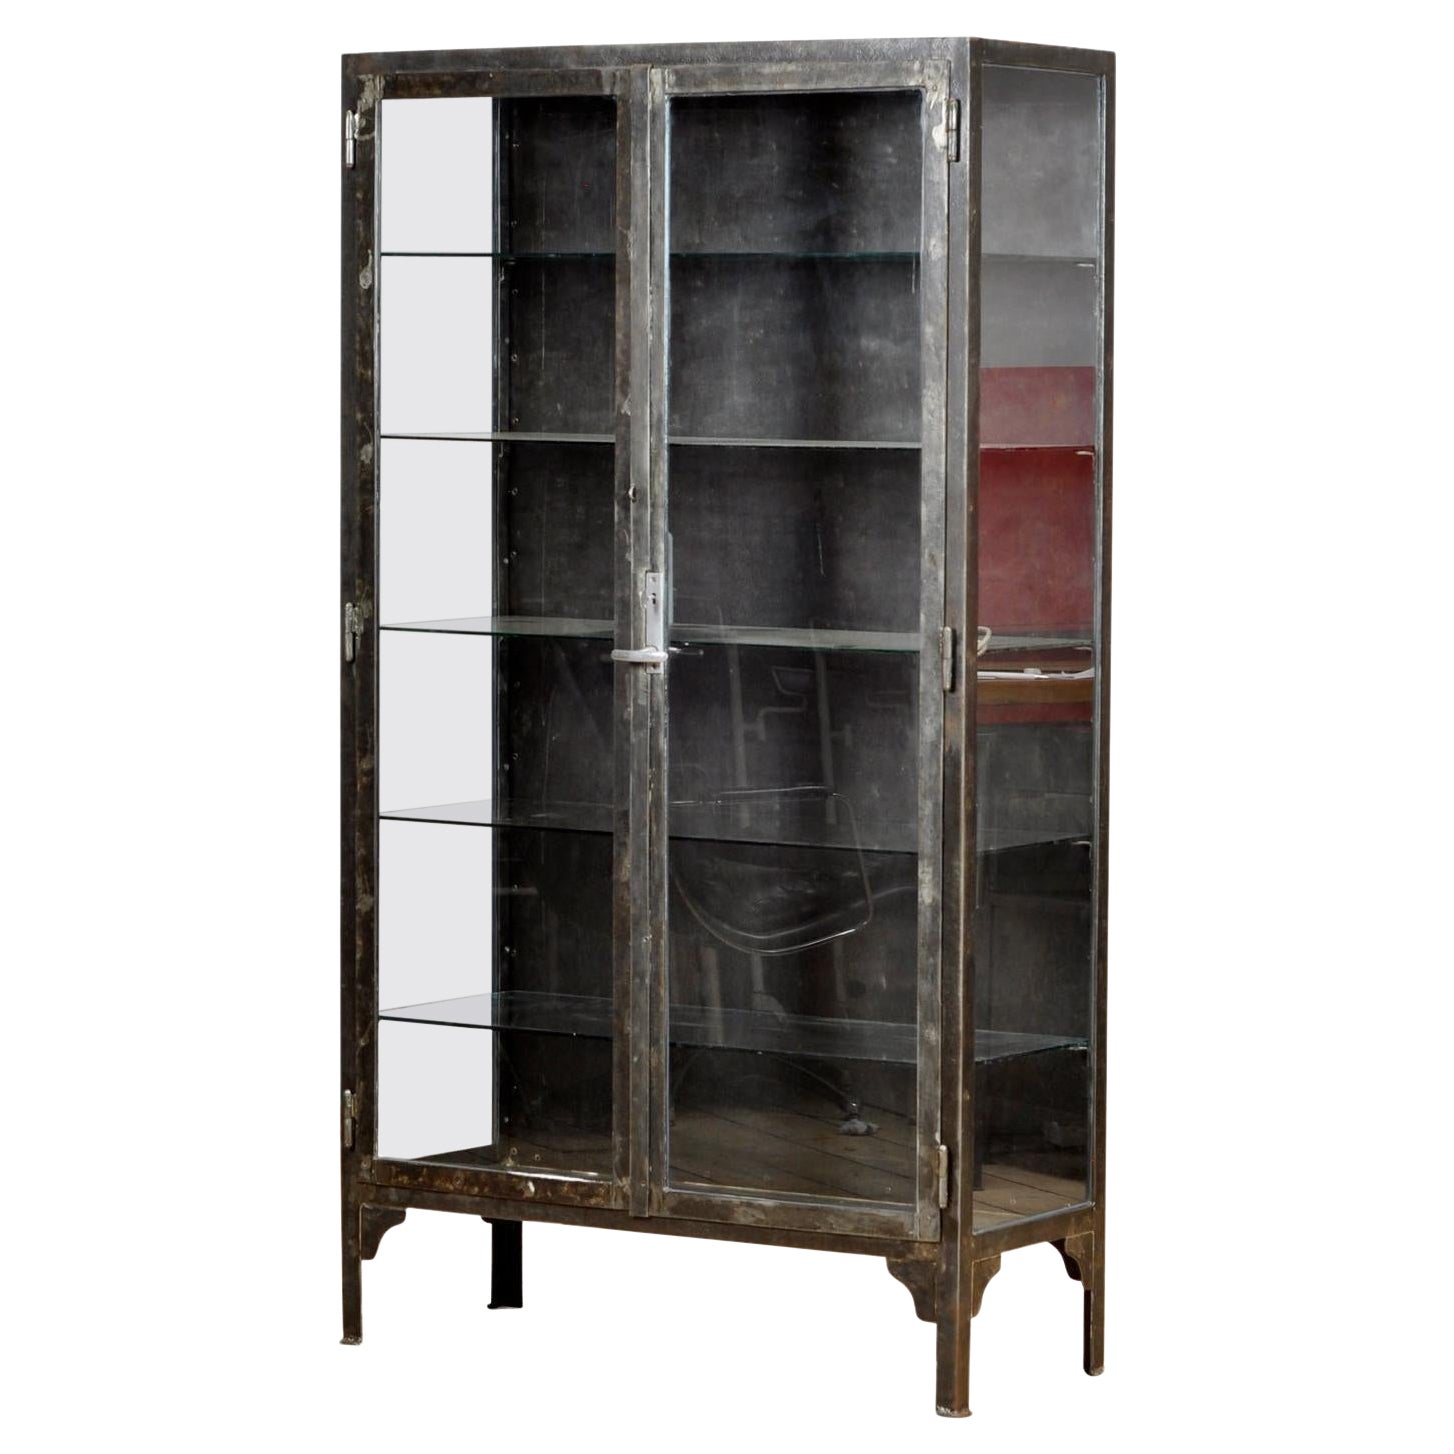 Vintage Steel and Glass Medical Display Cabinet, 1930s